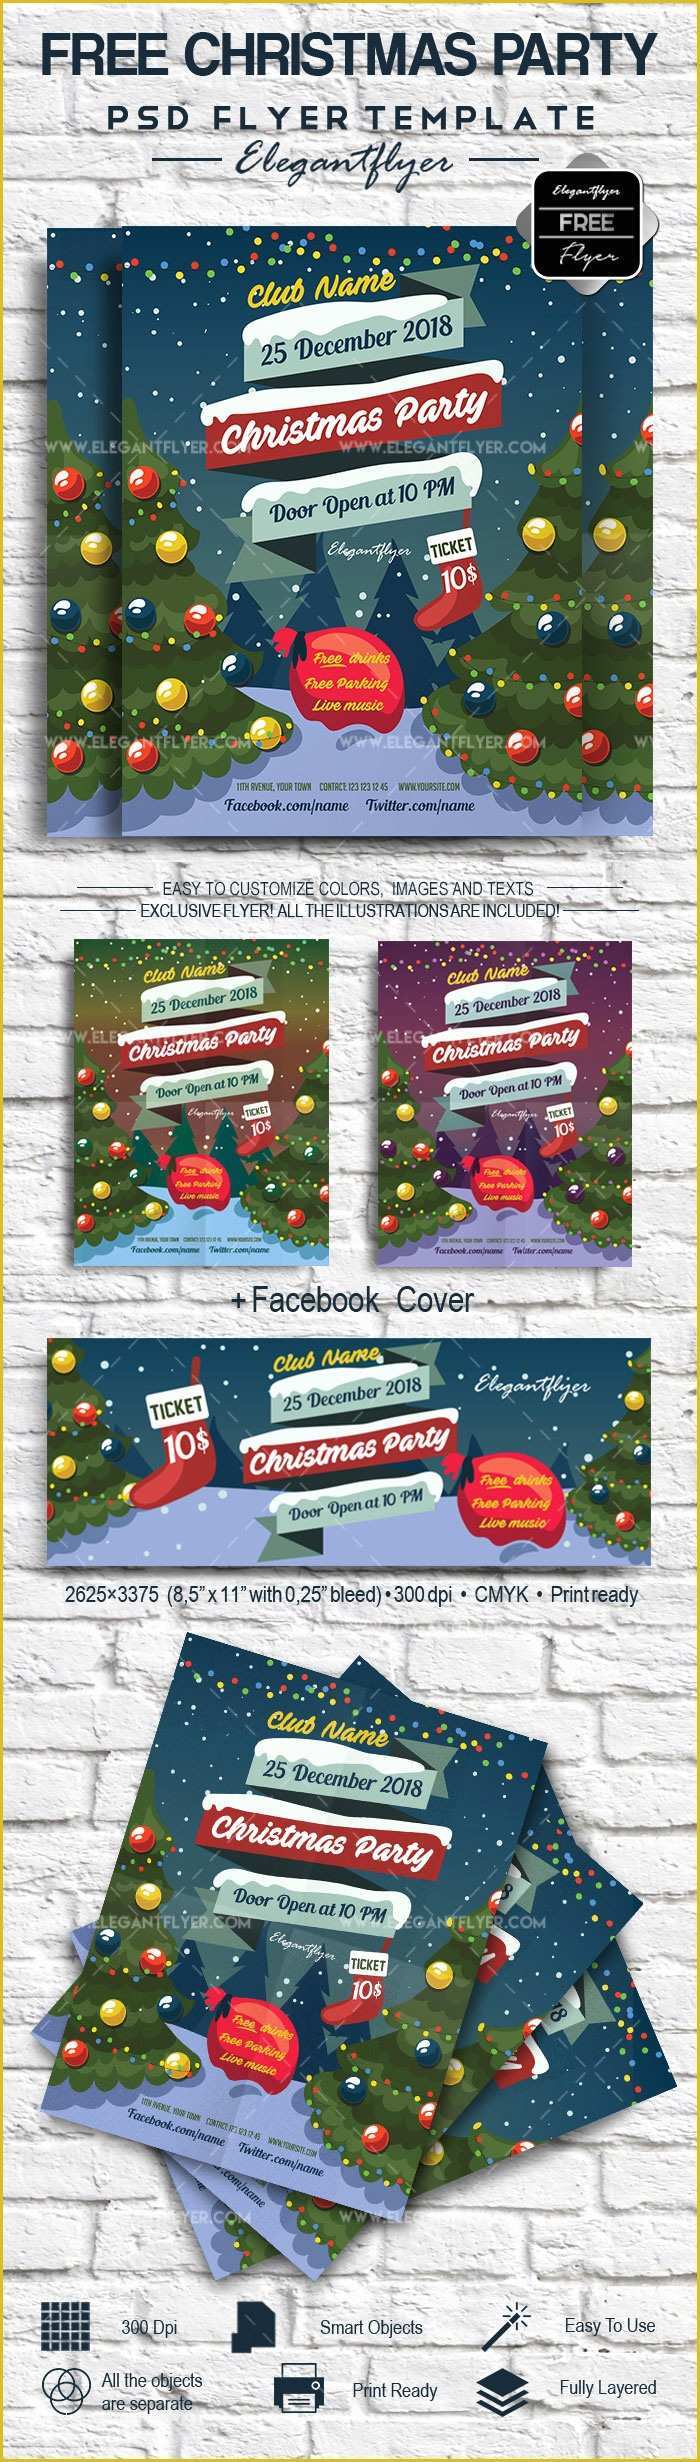 Christmas Flyers Templates Free Psd Of Psd Flyer for Christmas Tree Party – by Elegantflyer